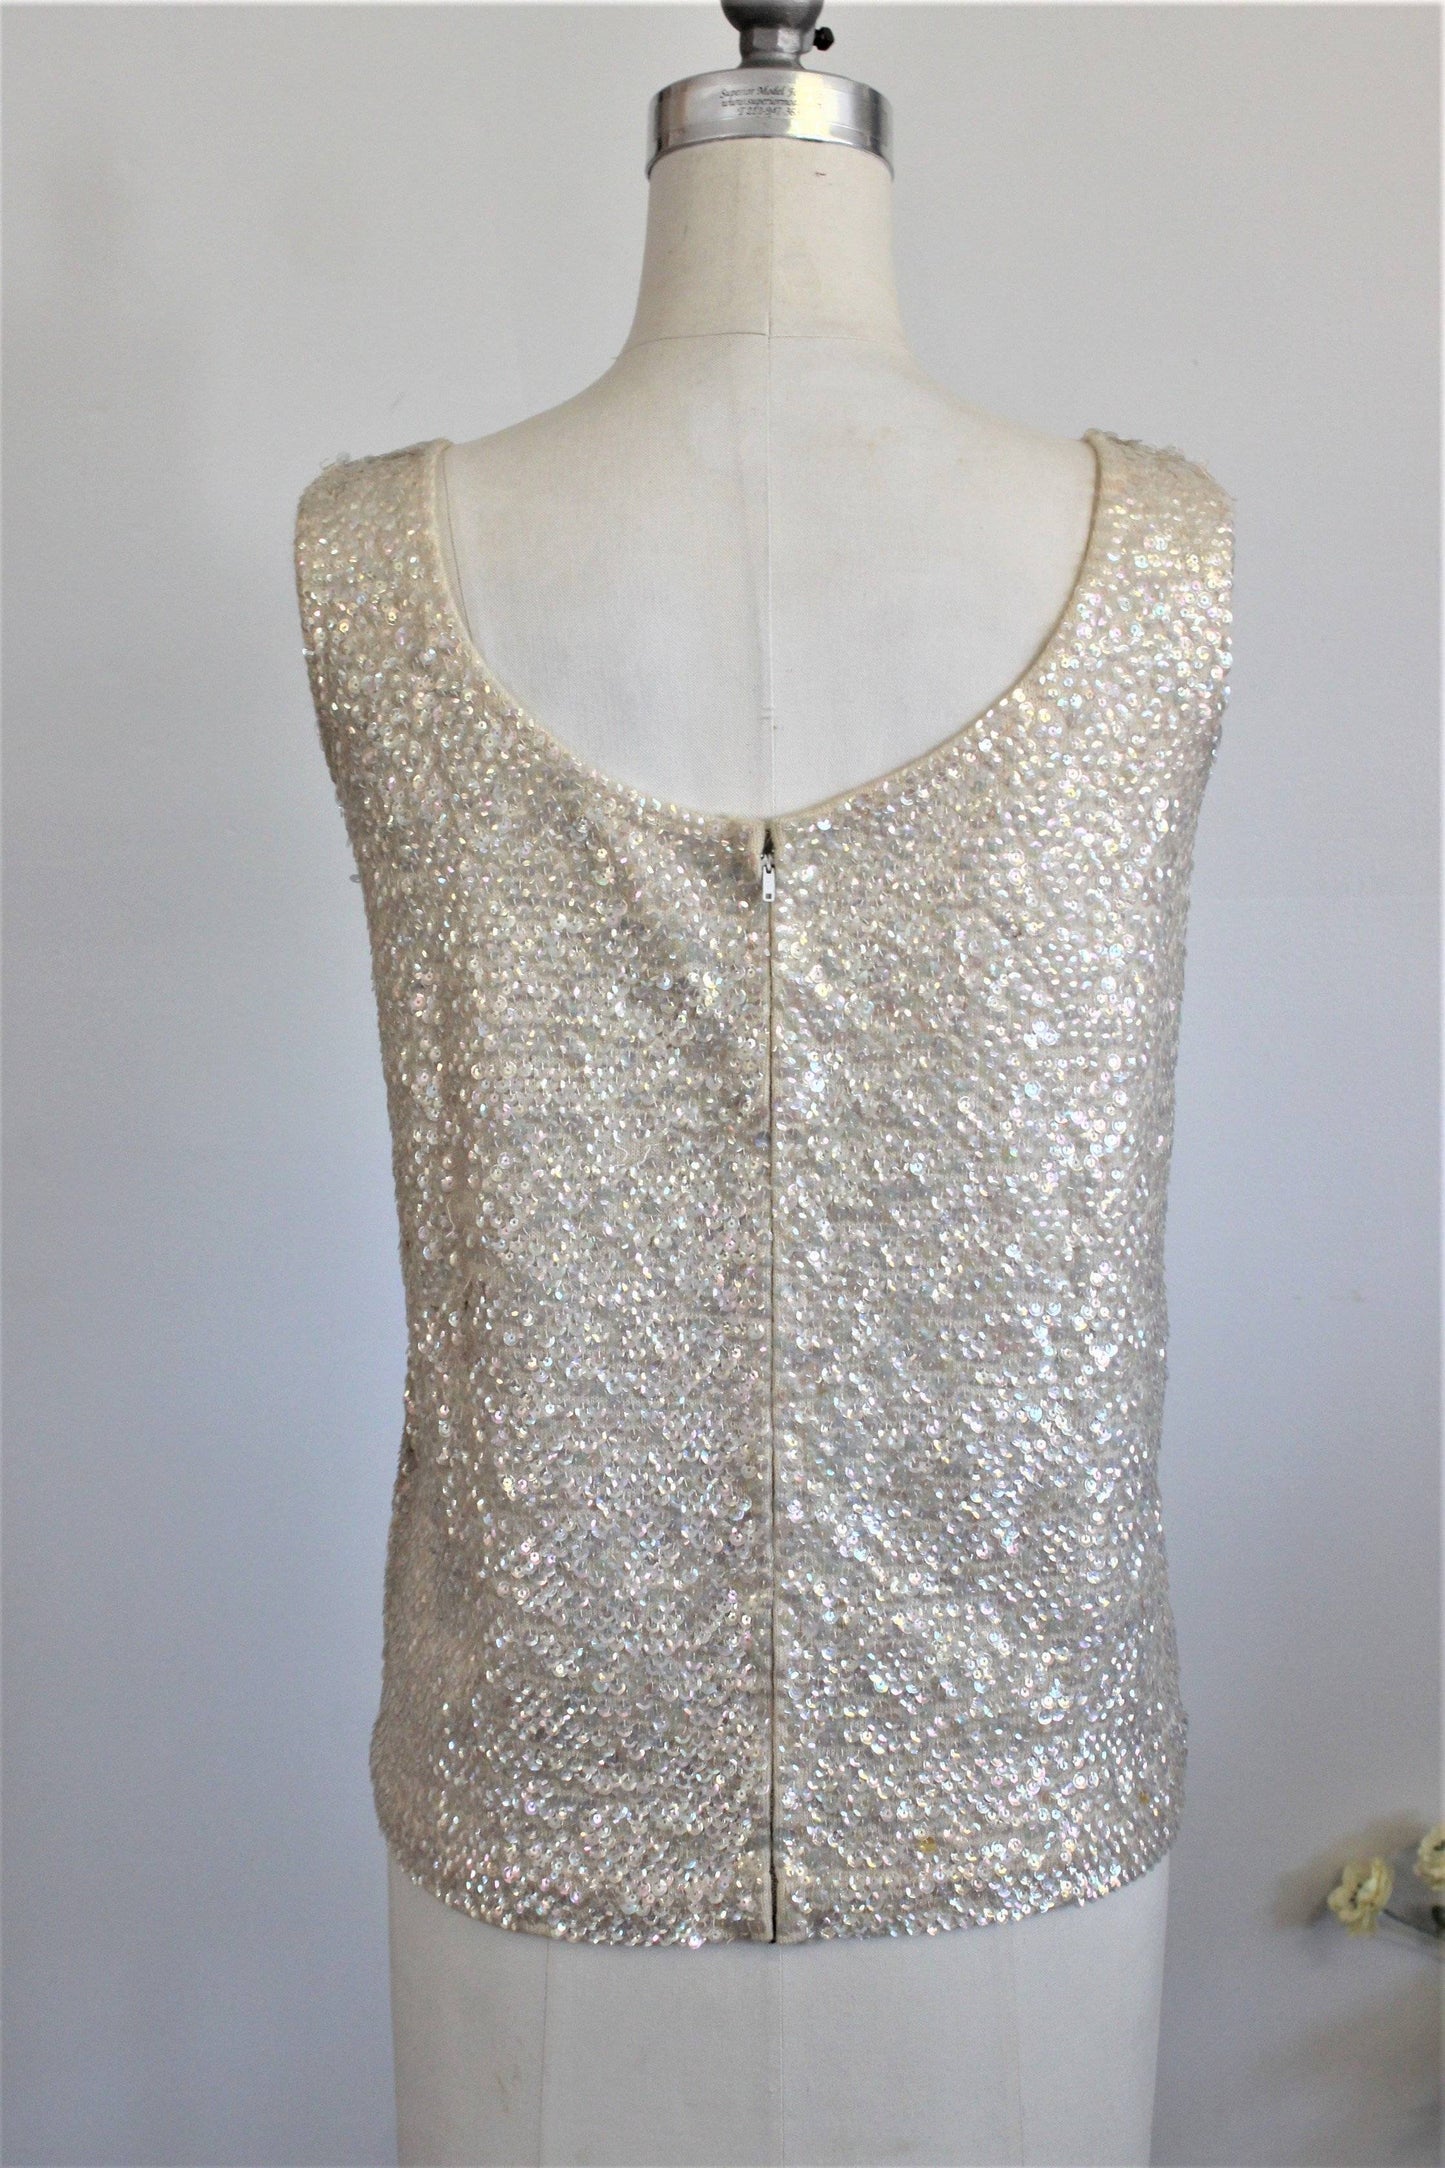 Vintage 1960s Sequined Party Sweater, by Danny Ling-Toadstool Farm Vintage-1960s Sequinned Top,1960s Sweater,60s Party Top,Boxy Sweater,Danny Ling,Plus Size,Sleeveless Sweater,Vintage,Vintage Clothing,Vintage Sequins,Wool